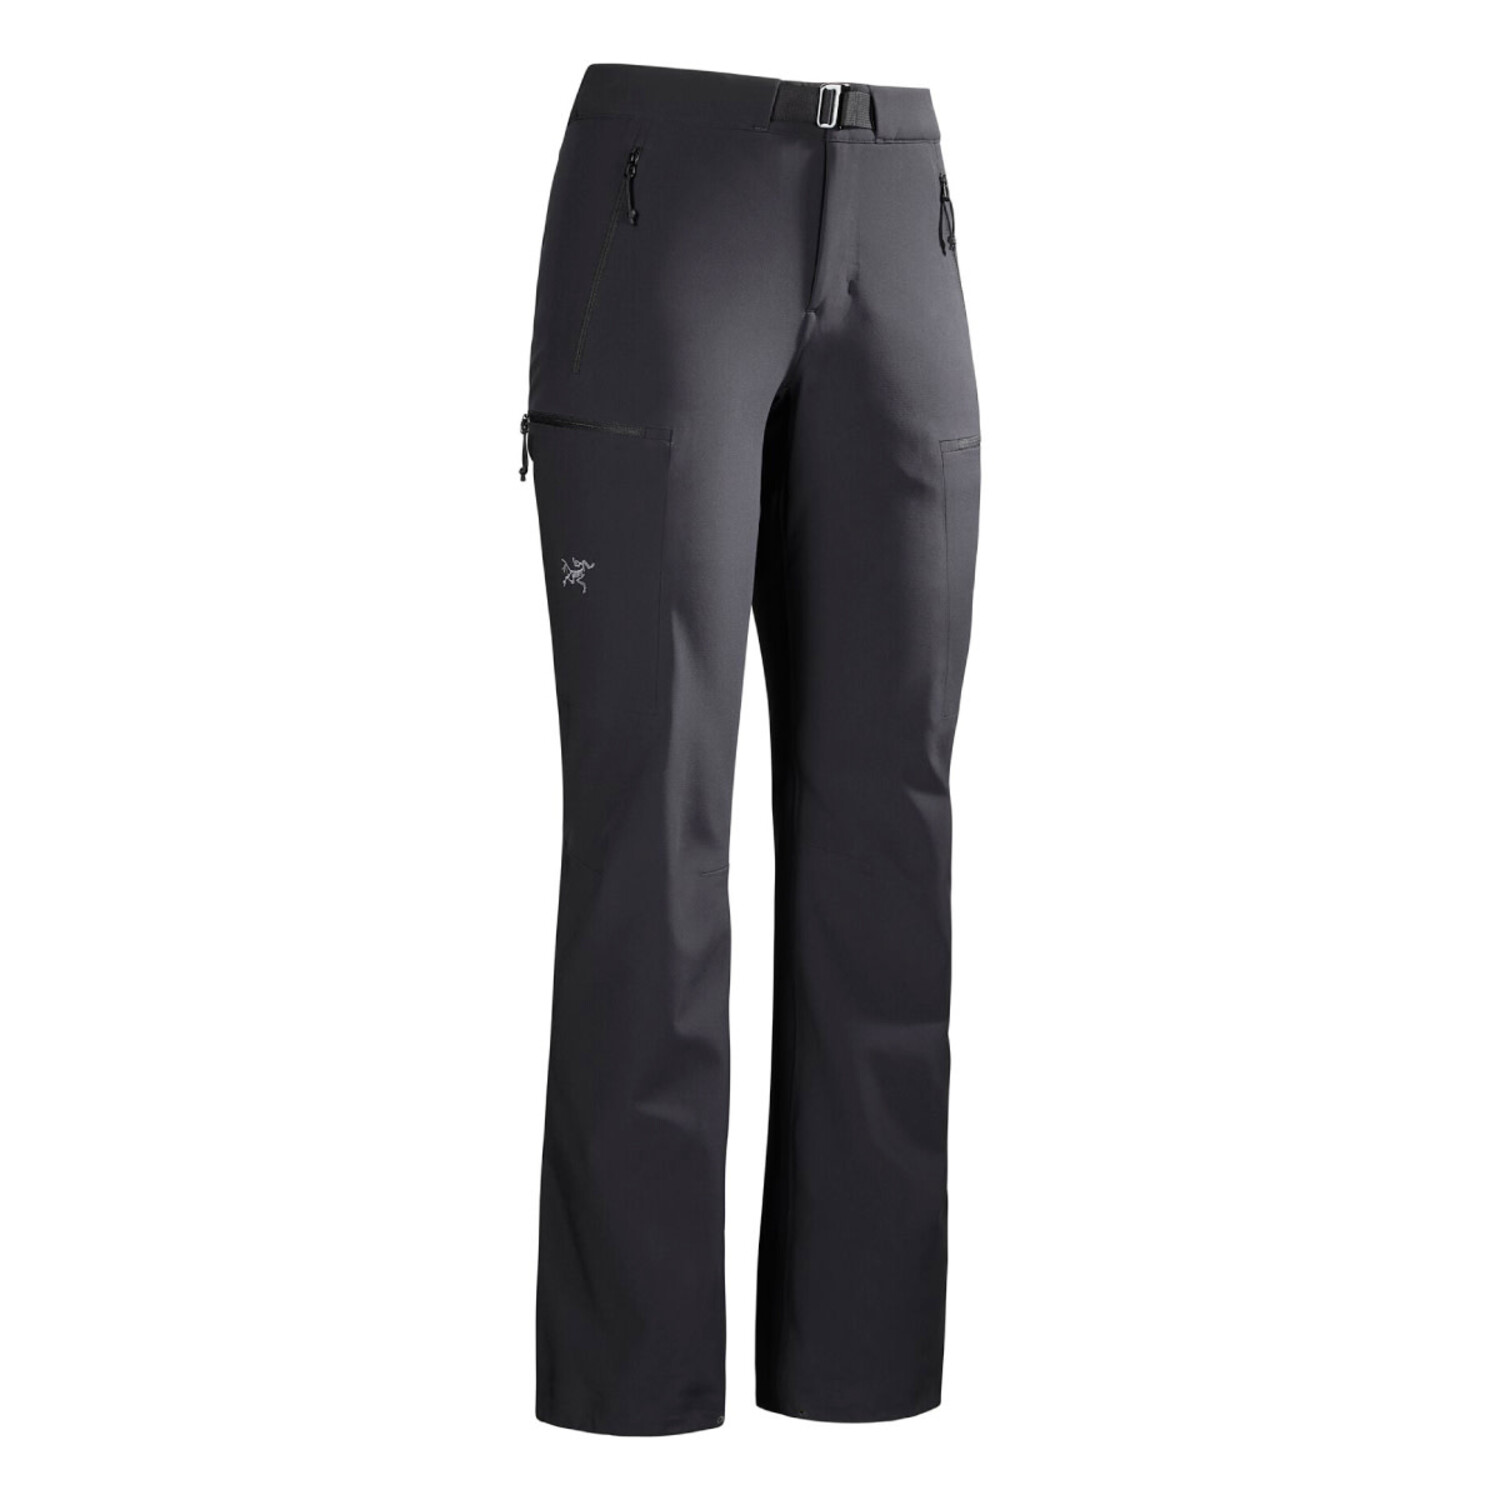 Arc'tery Women's Hiking Travel Trousers Pants Size 12 Inseam 35